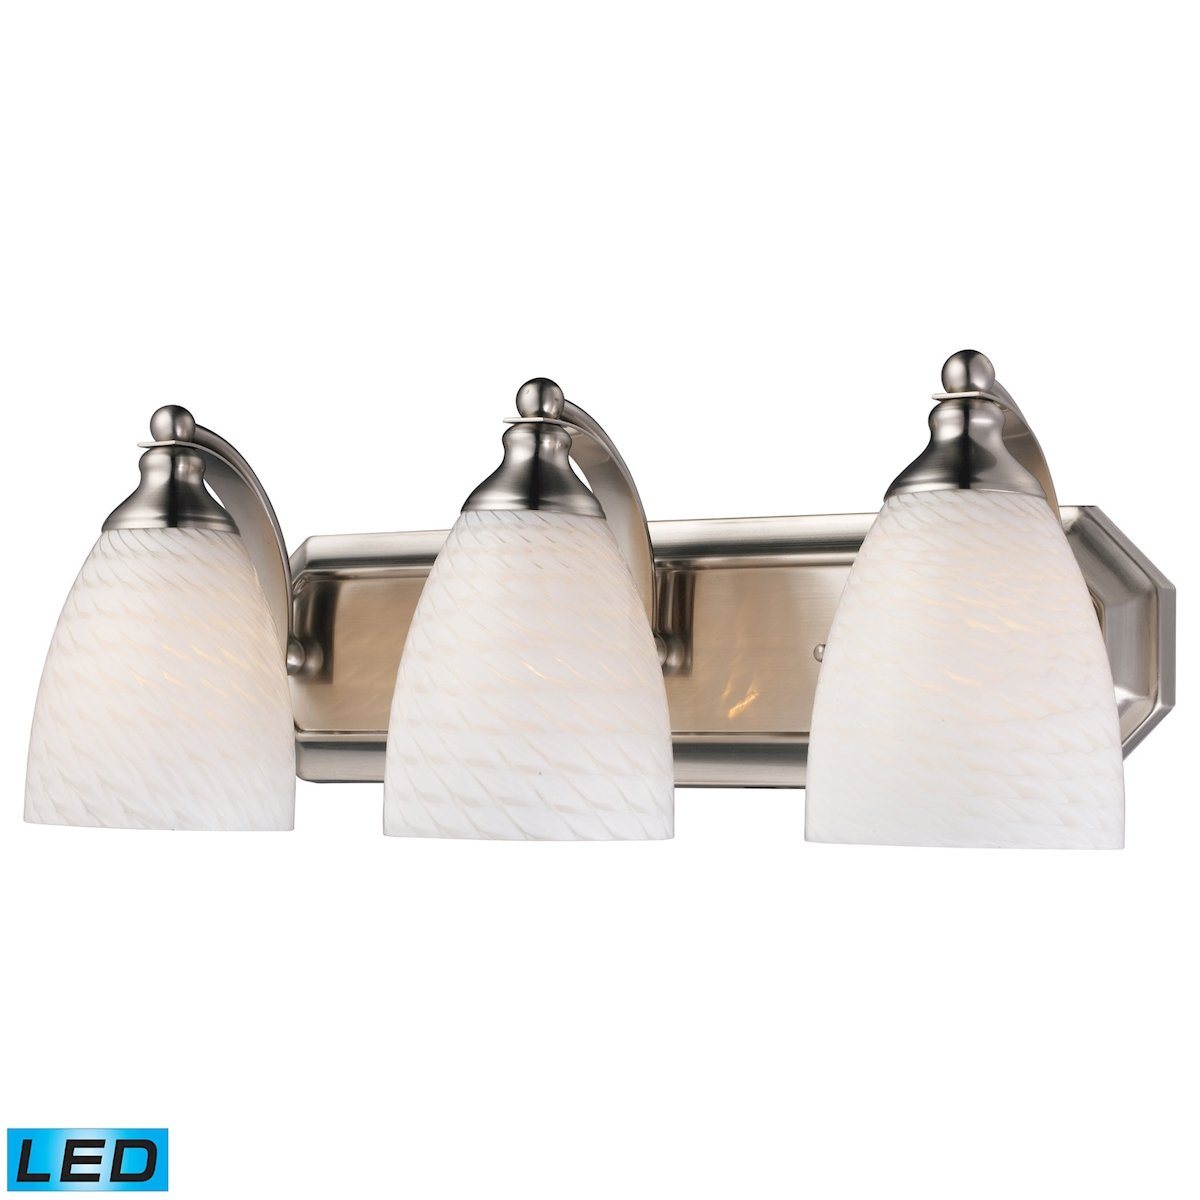 Bath And Spa 3 Light LED Vanity In Satin Nickel And White Swirl Glass Wall Elk Lighting 